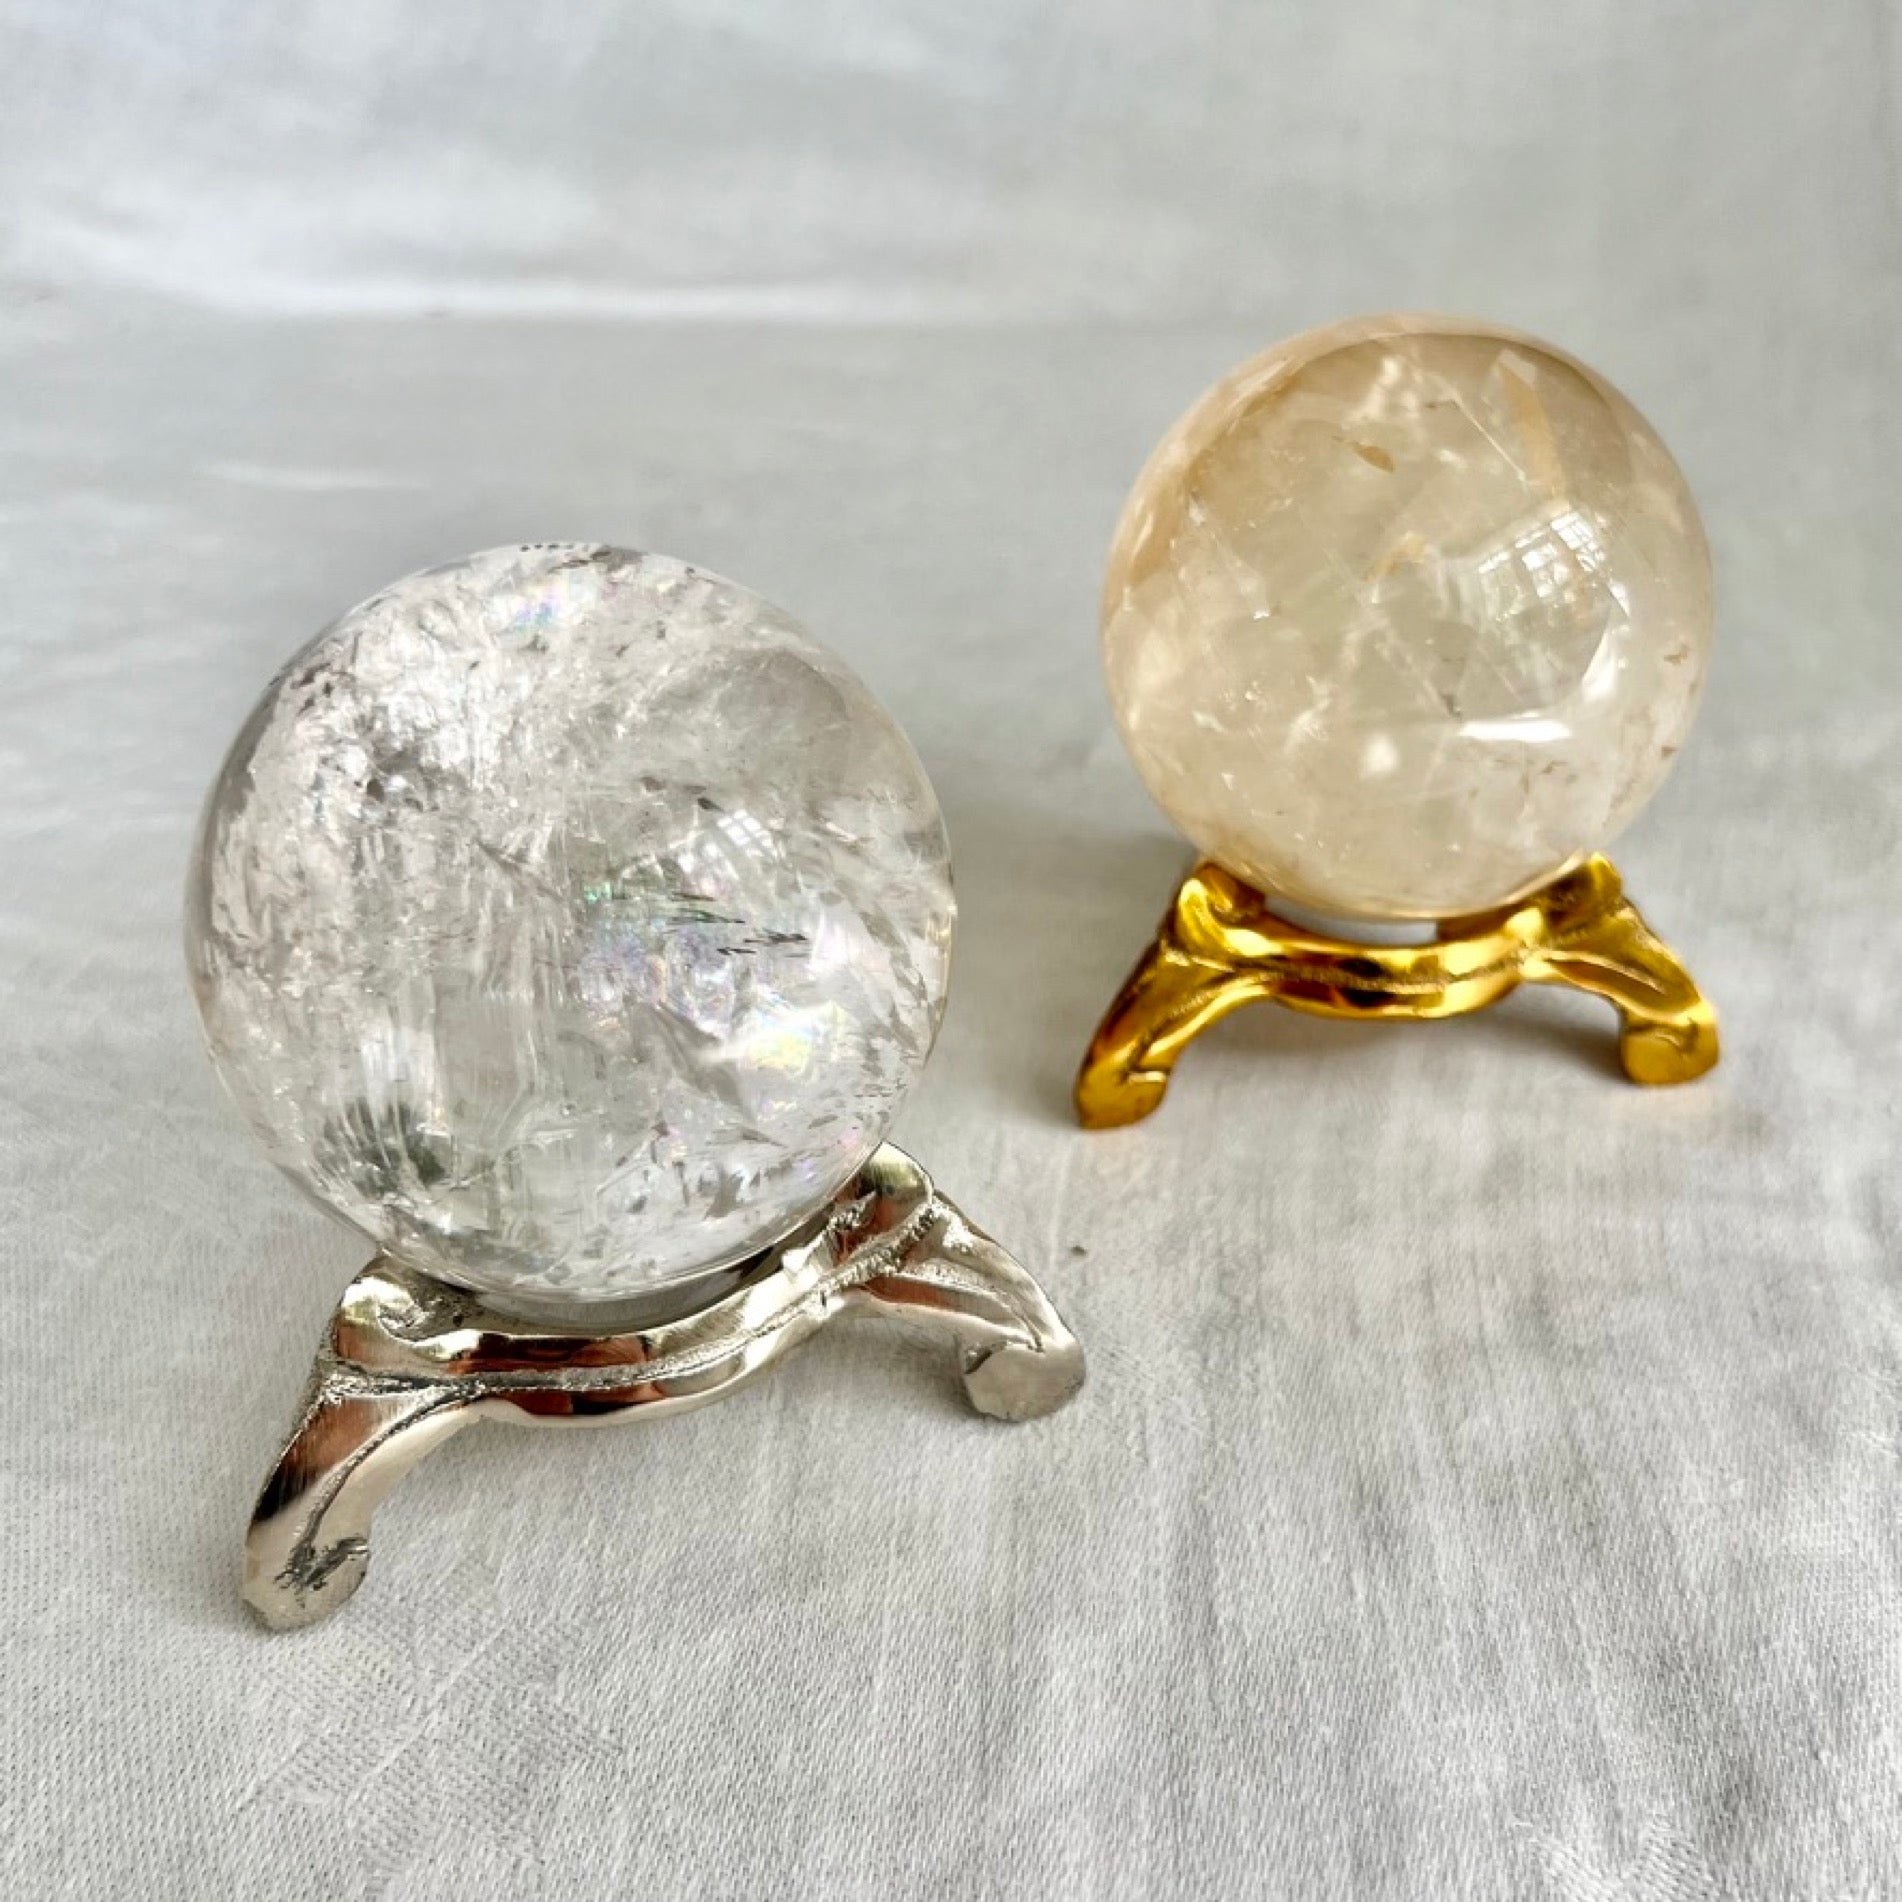 Vintage swirl style nickel and gold plated crystal sphere holders with crystal spheres on top